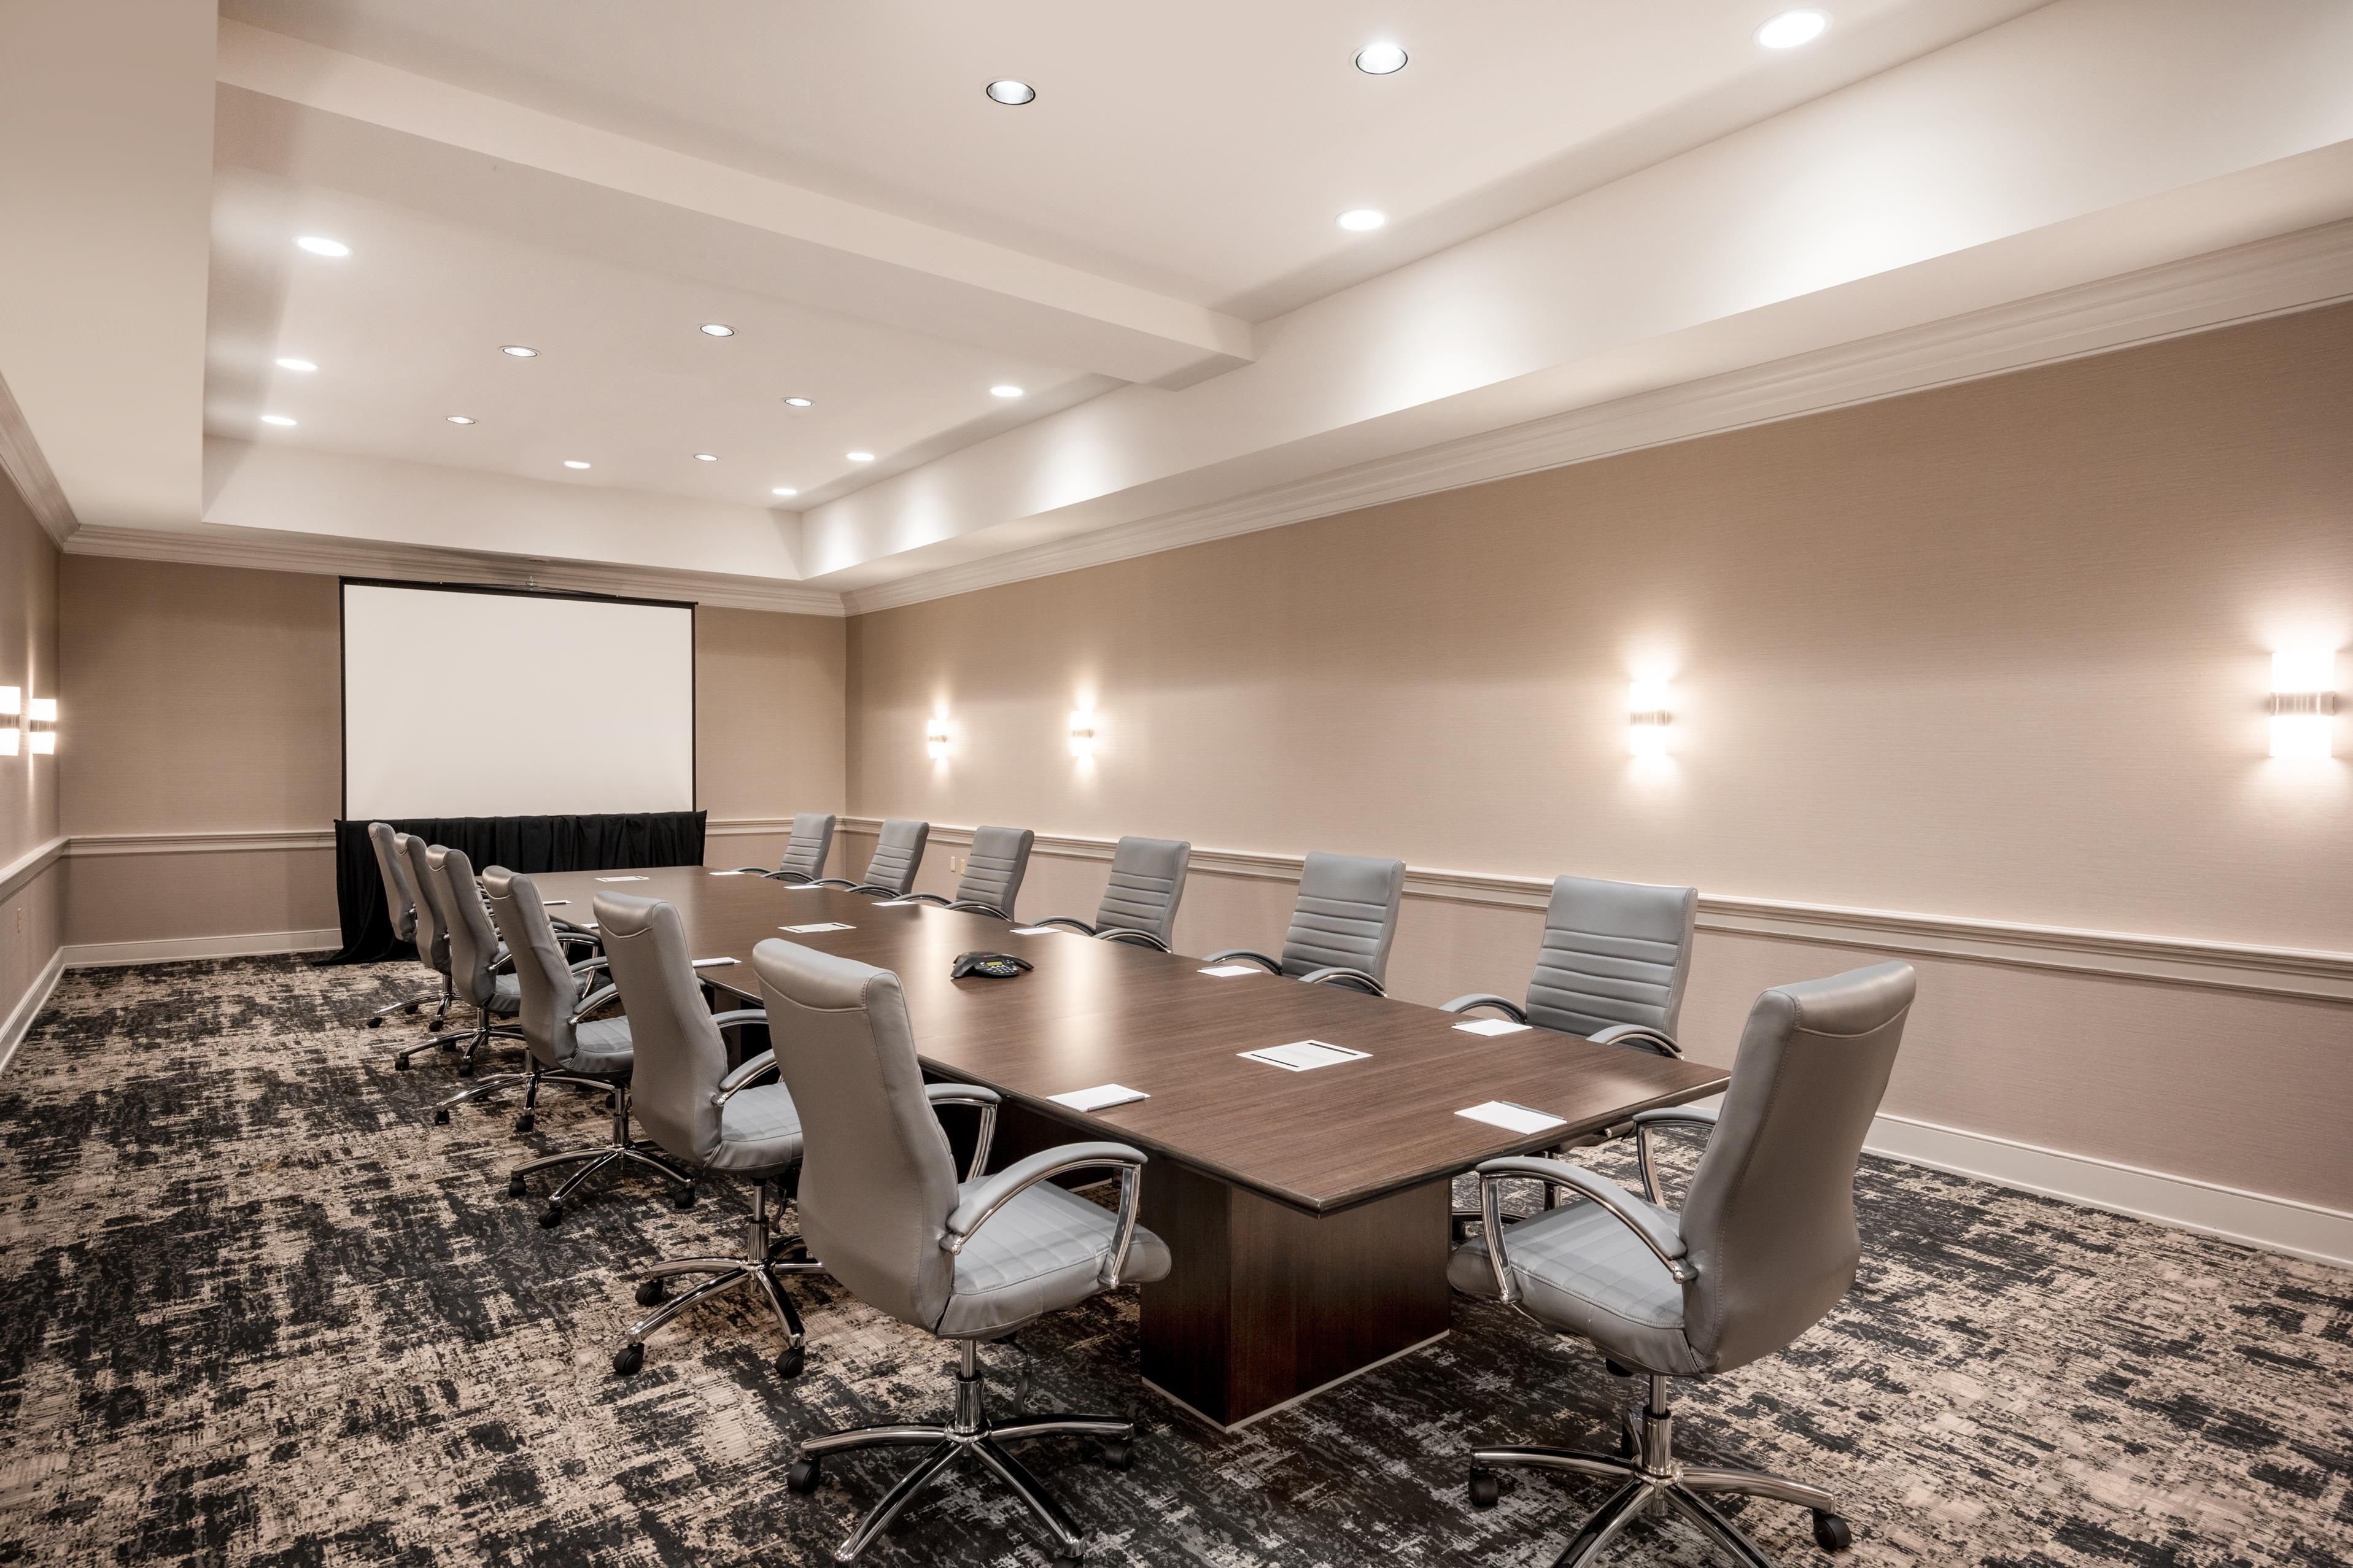 High Street 22 Board Room has executive seating for up to 20 guest